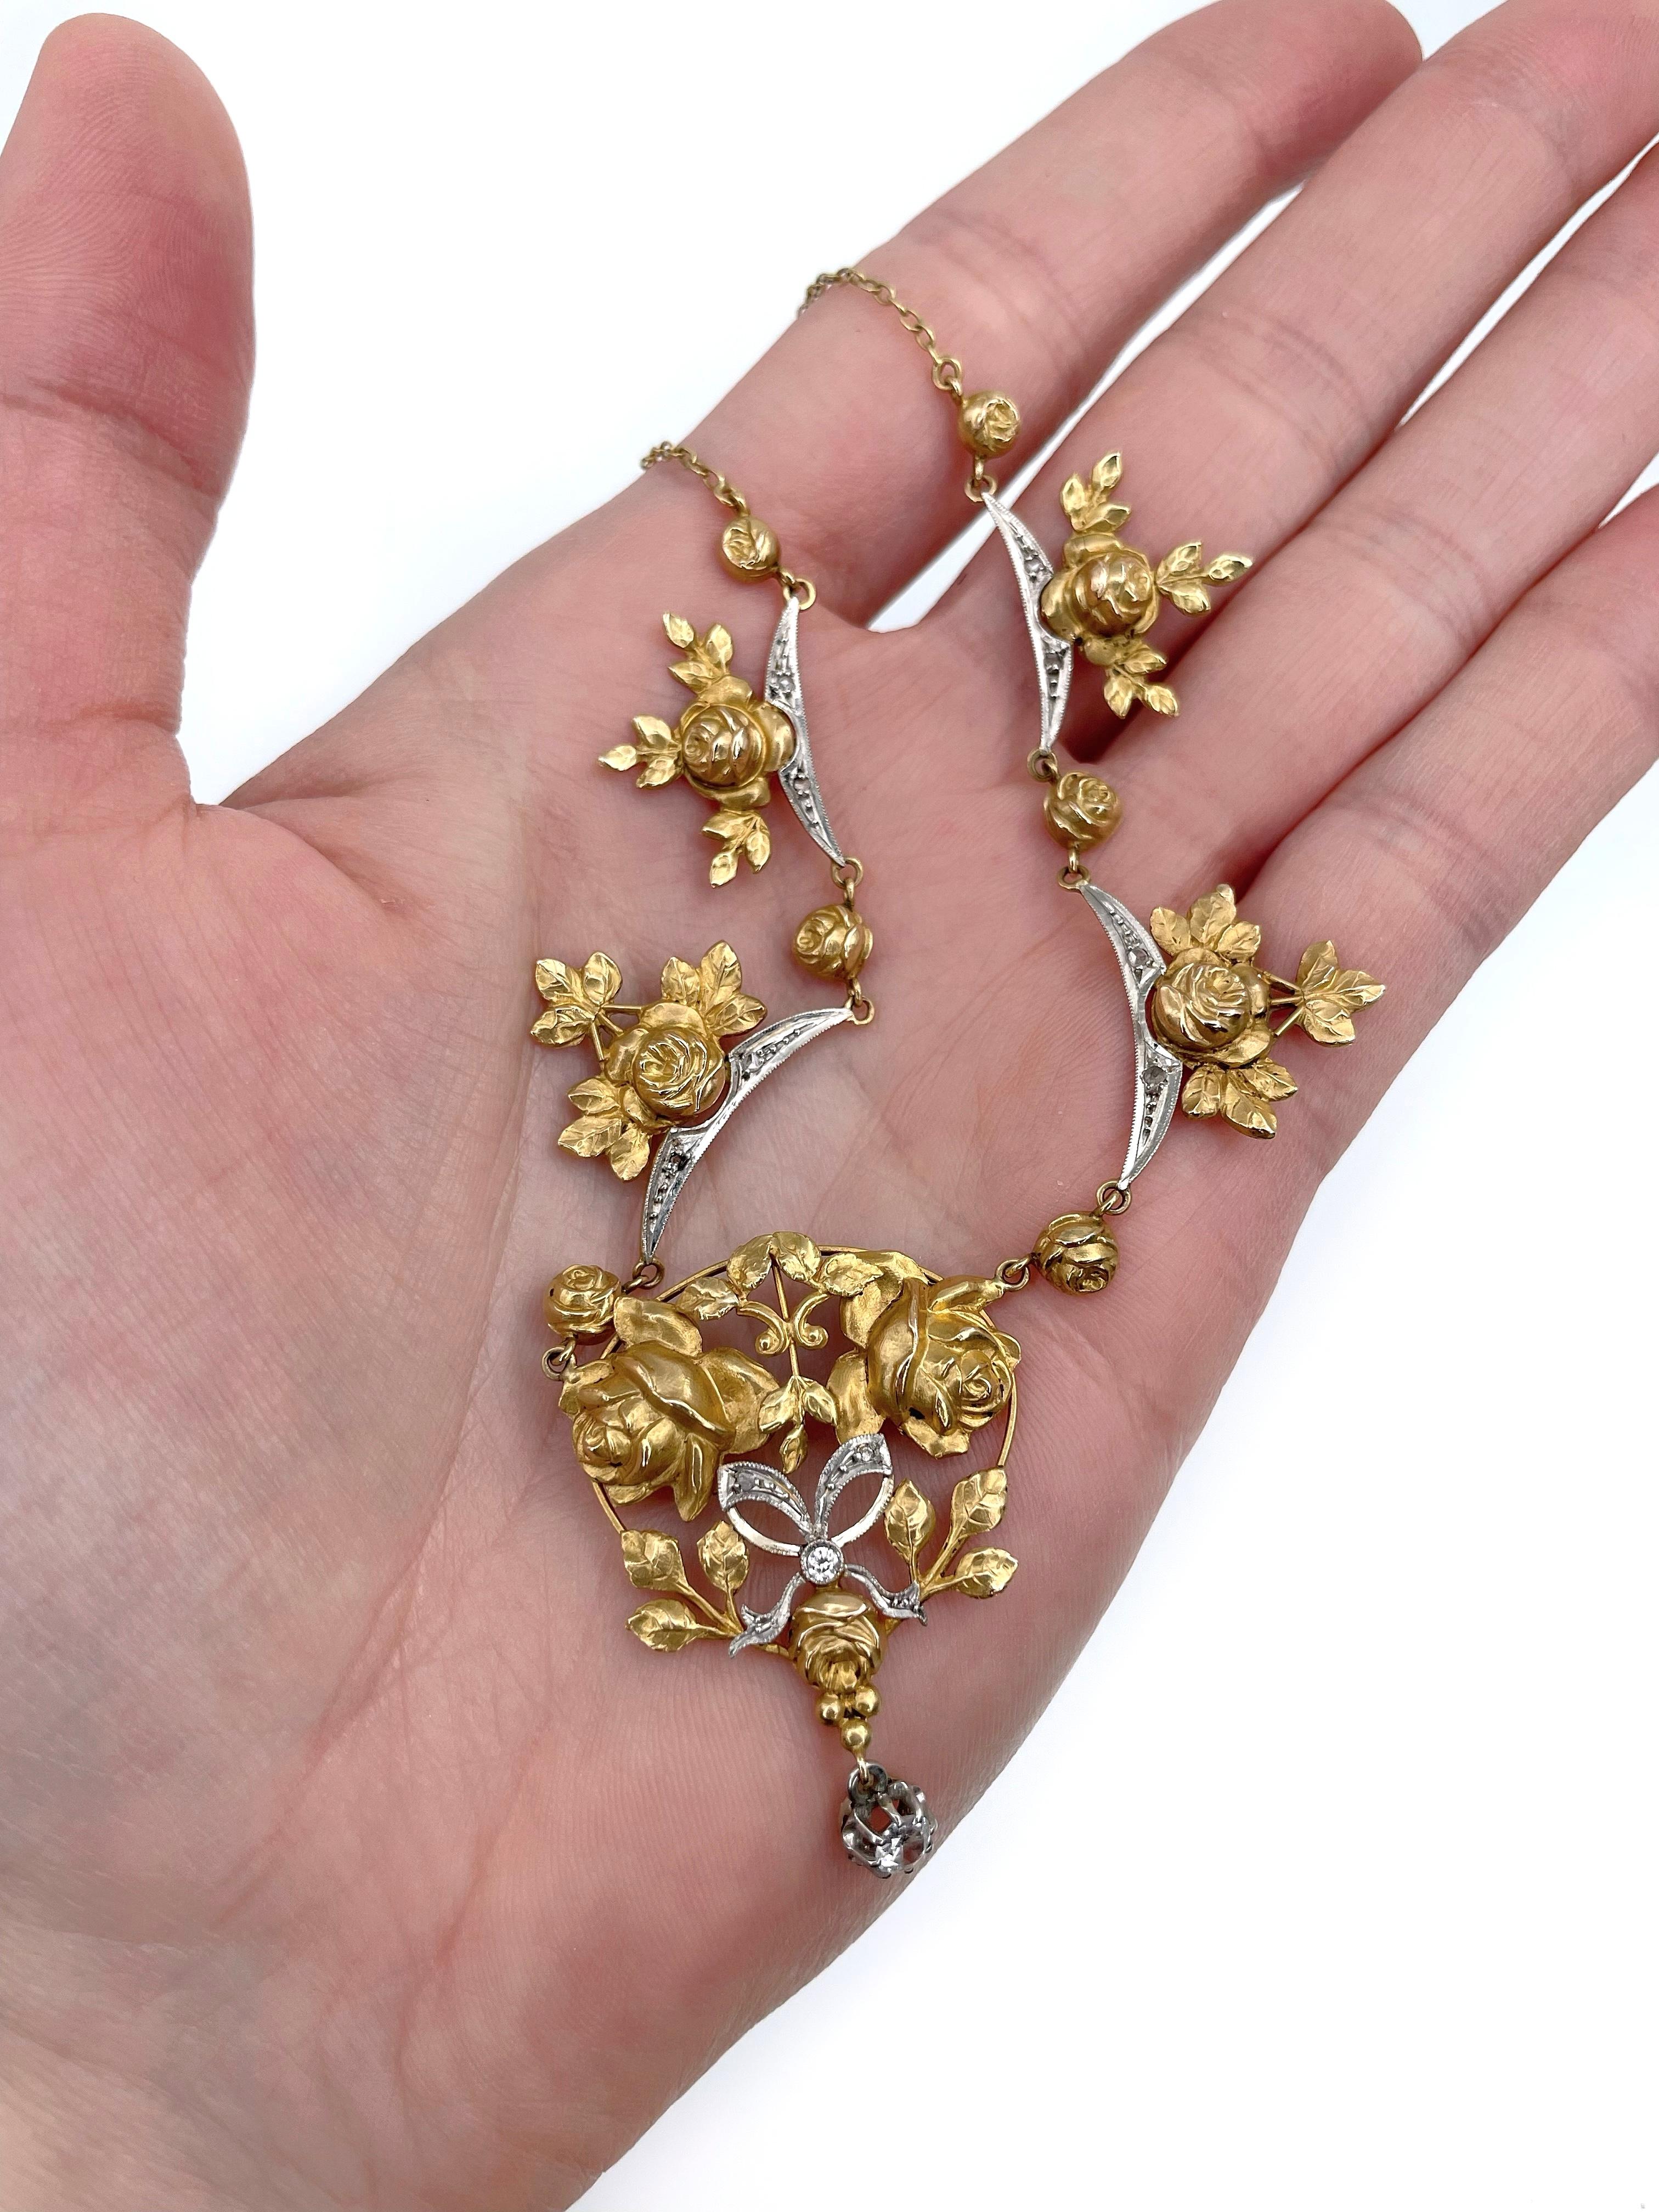 This is a stunning Belle Epoque rose motif floral design collier necklace crafted in 14K yellow gold. Circa 1900. It features old cut diamonds. The roses and petals are very detailed. 

It could be an amazing engagement or wedding gift as the roses